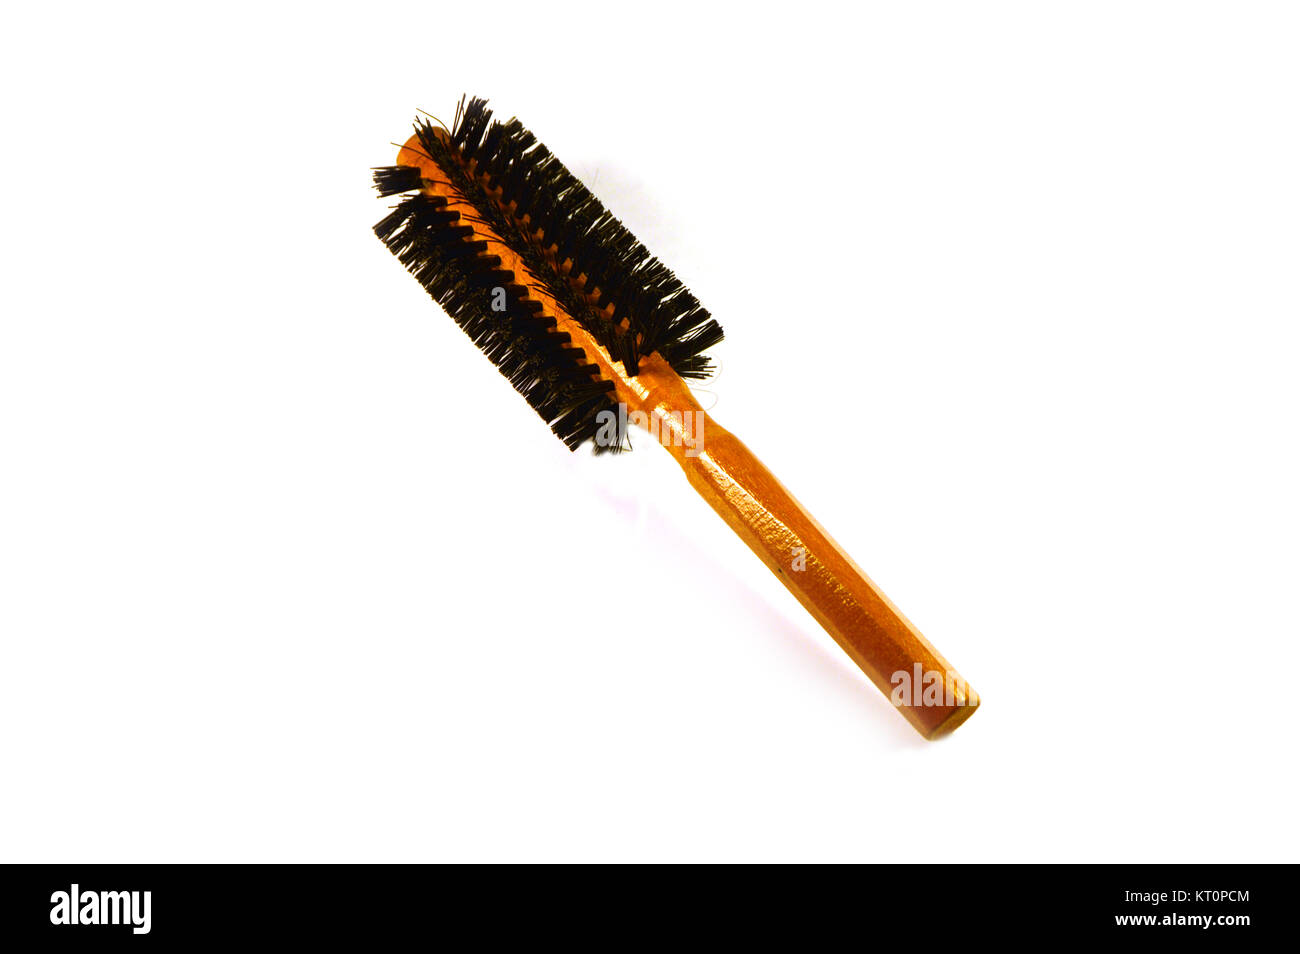 Brush comb pictures for personal care and hairstyling Stock Photo